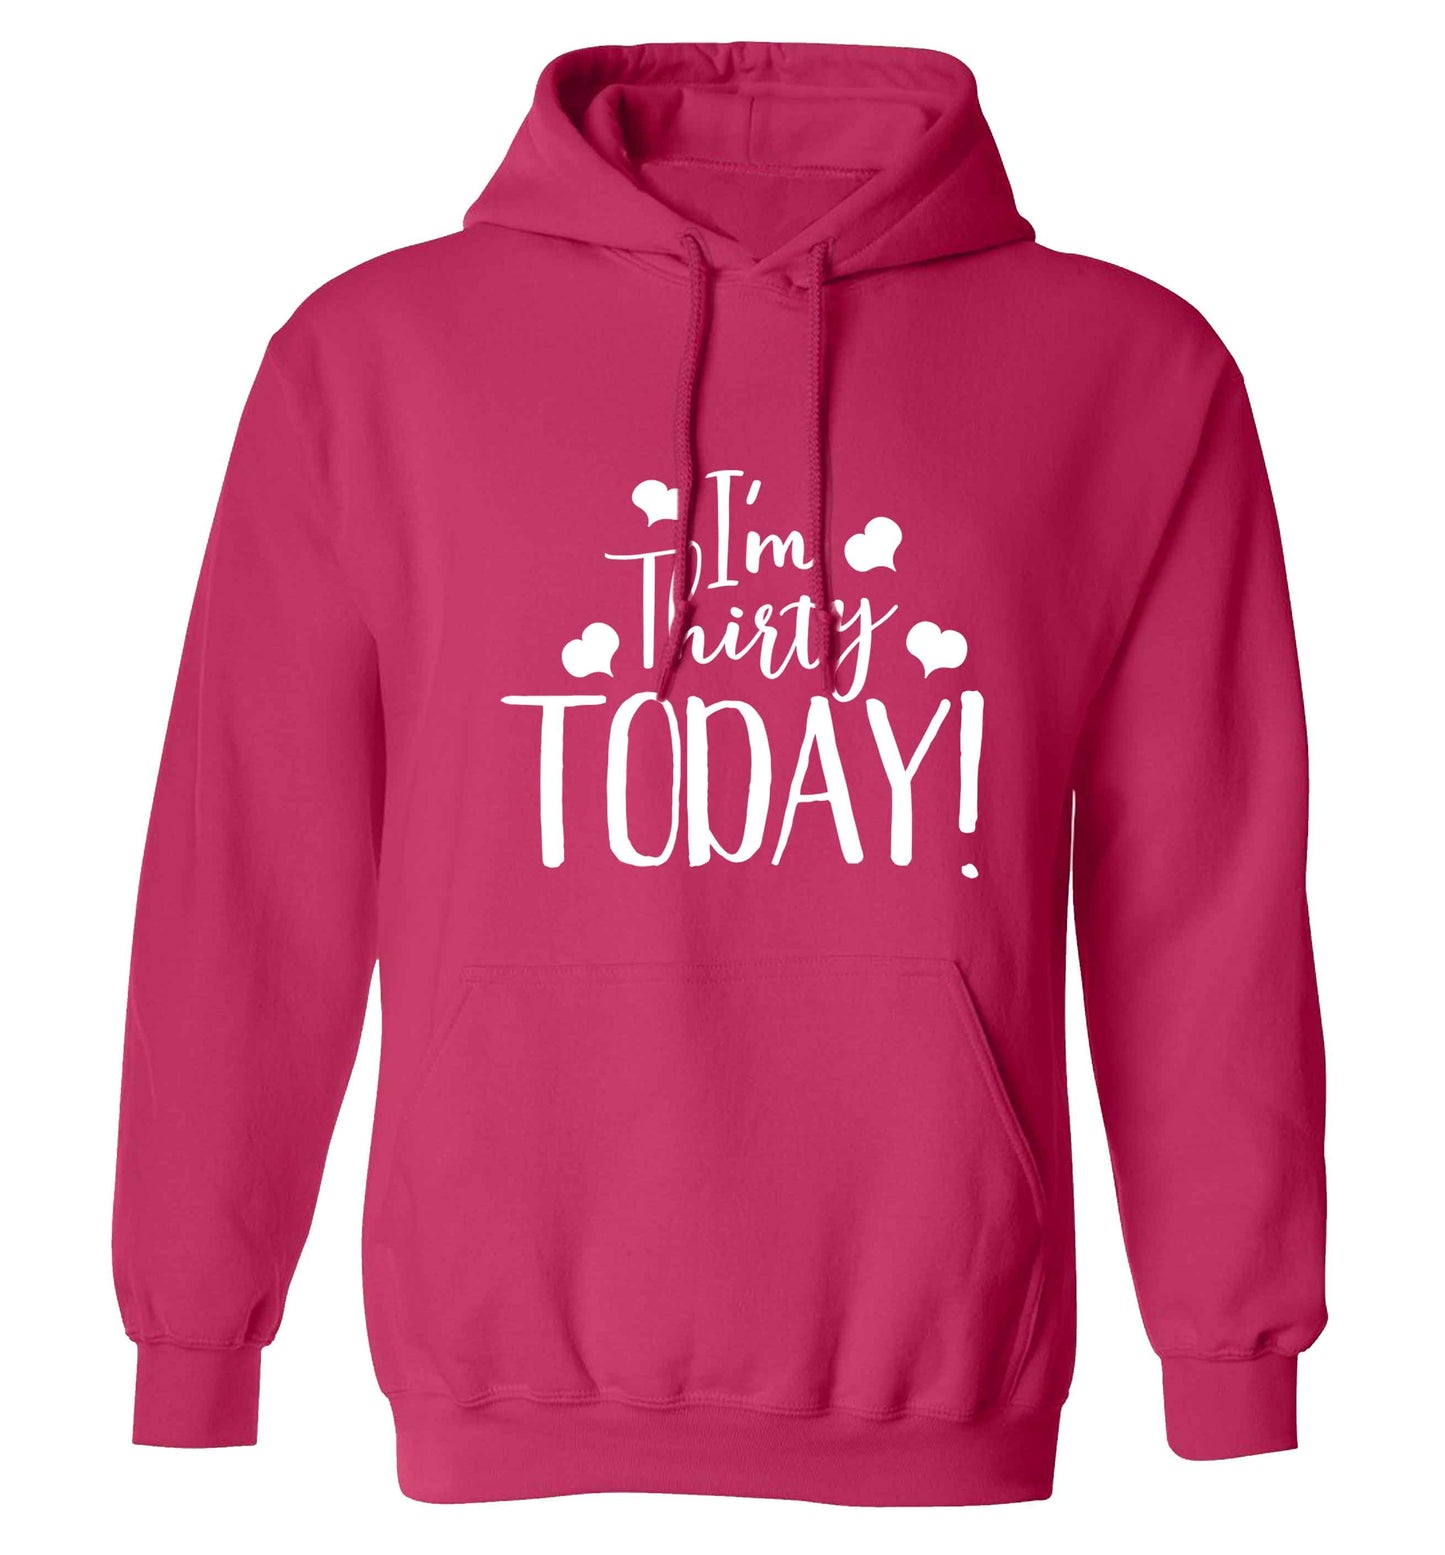 I'm thirty today! adults unisex pink hoodie 2XL